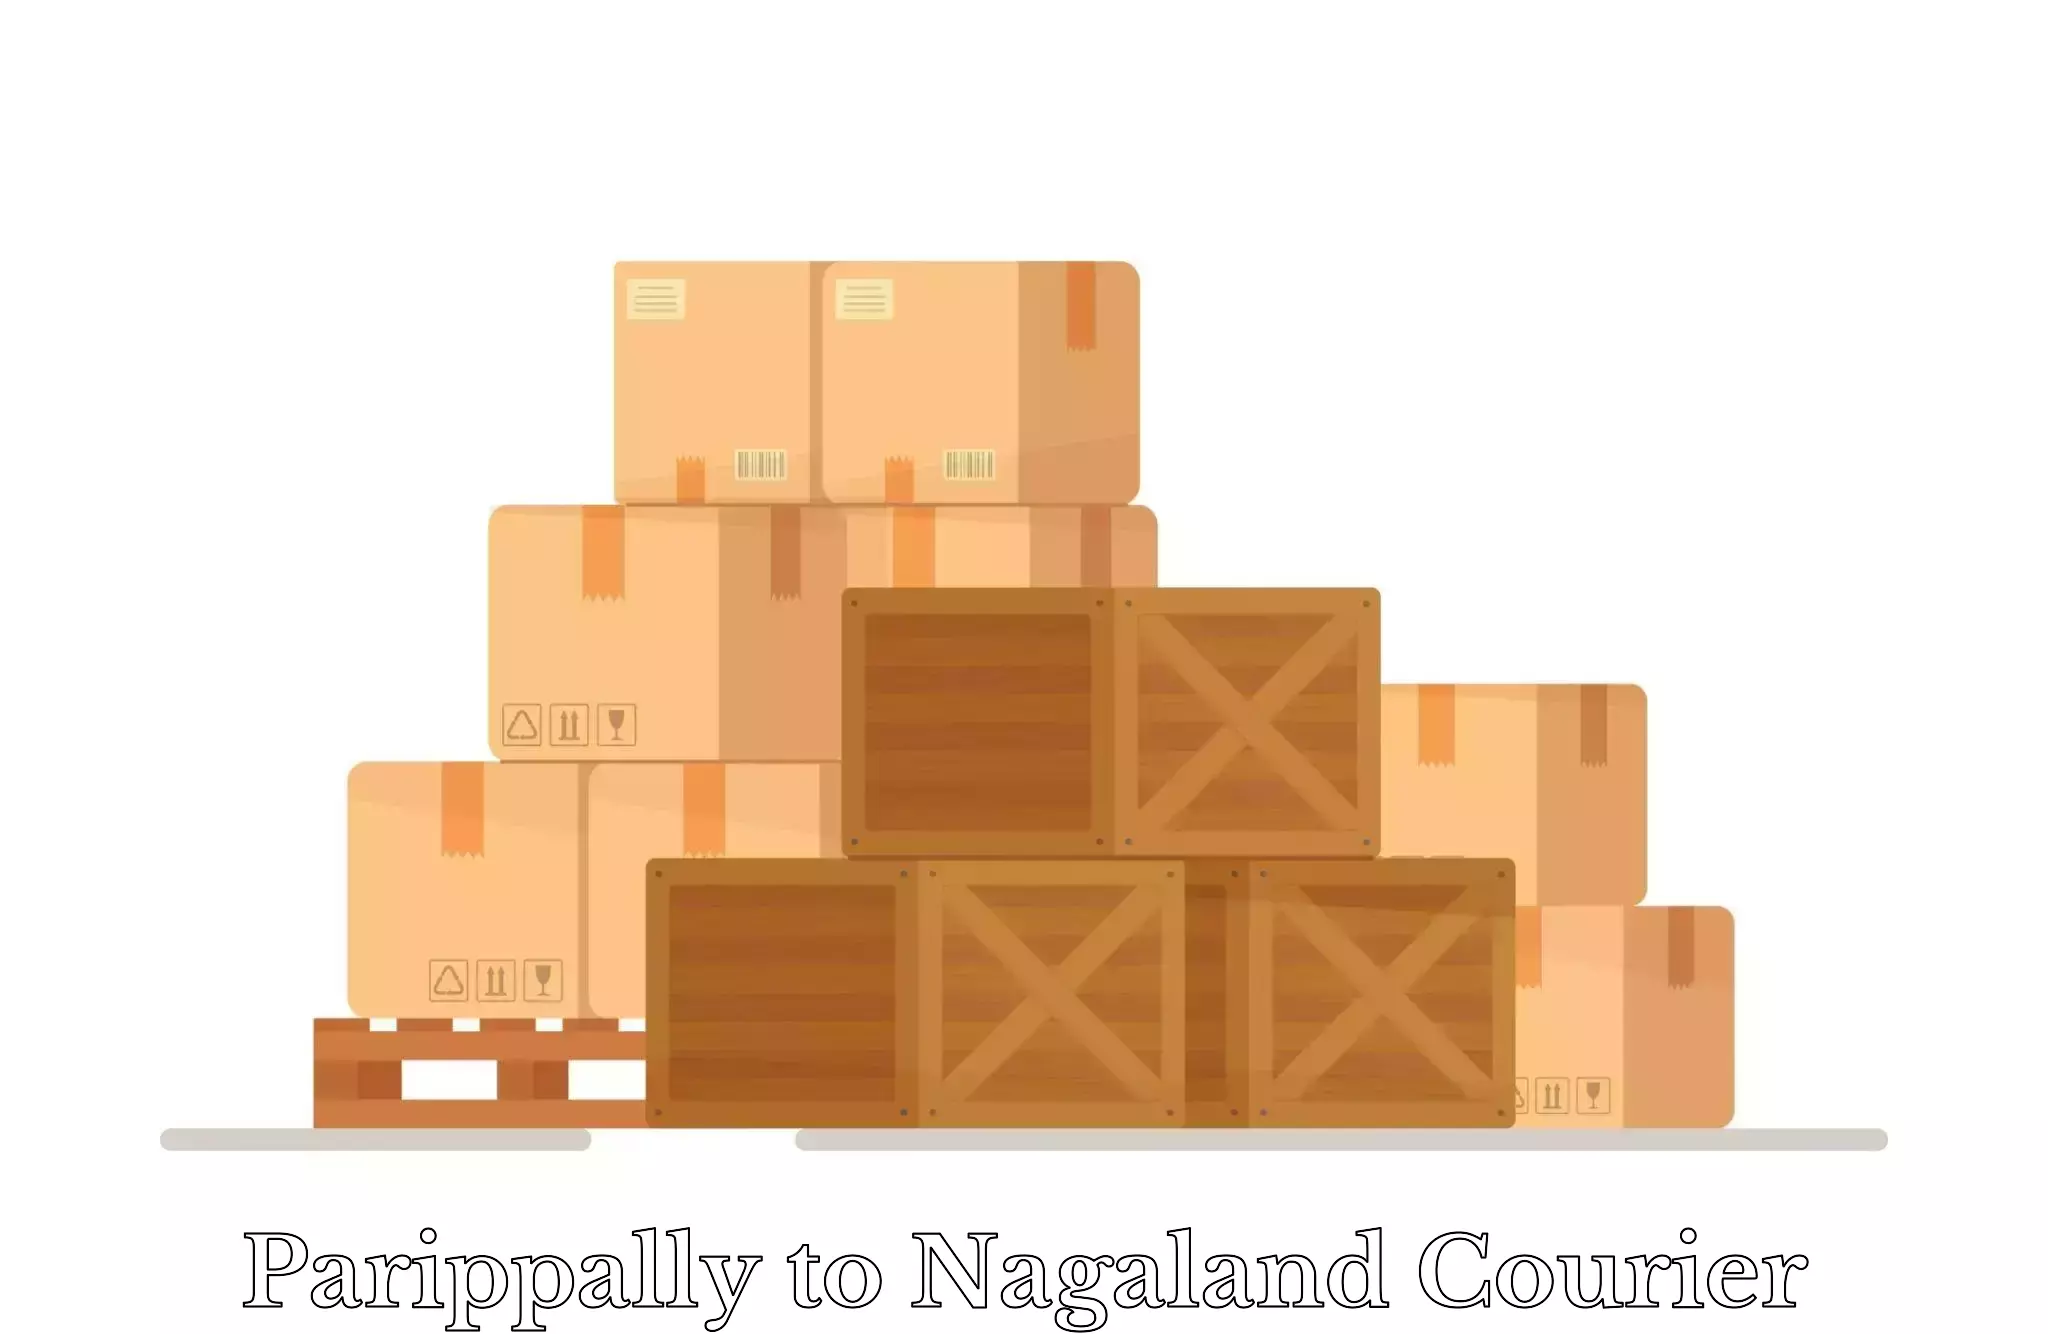 Luggage storage and delivery Parippally to Nagaland